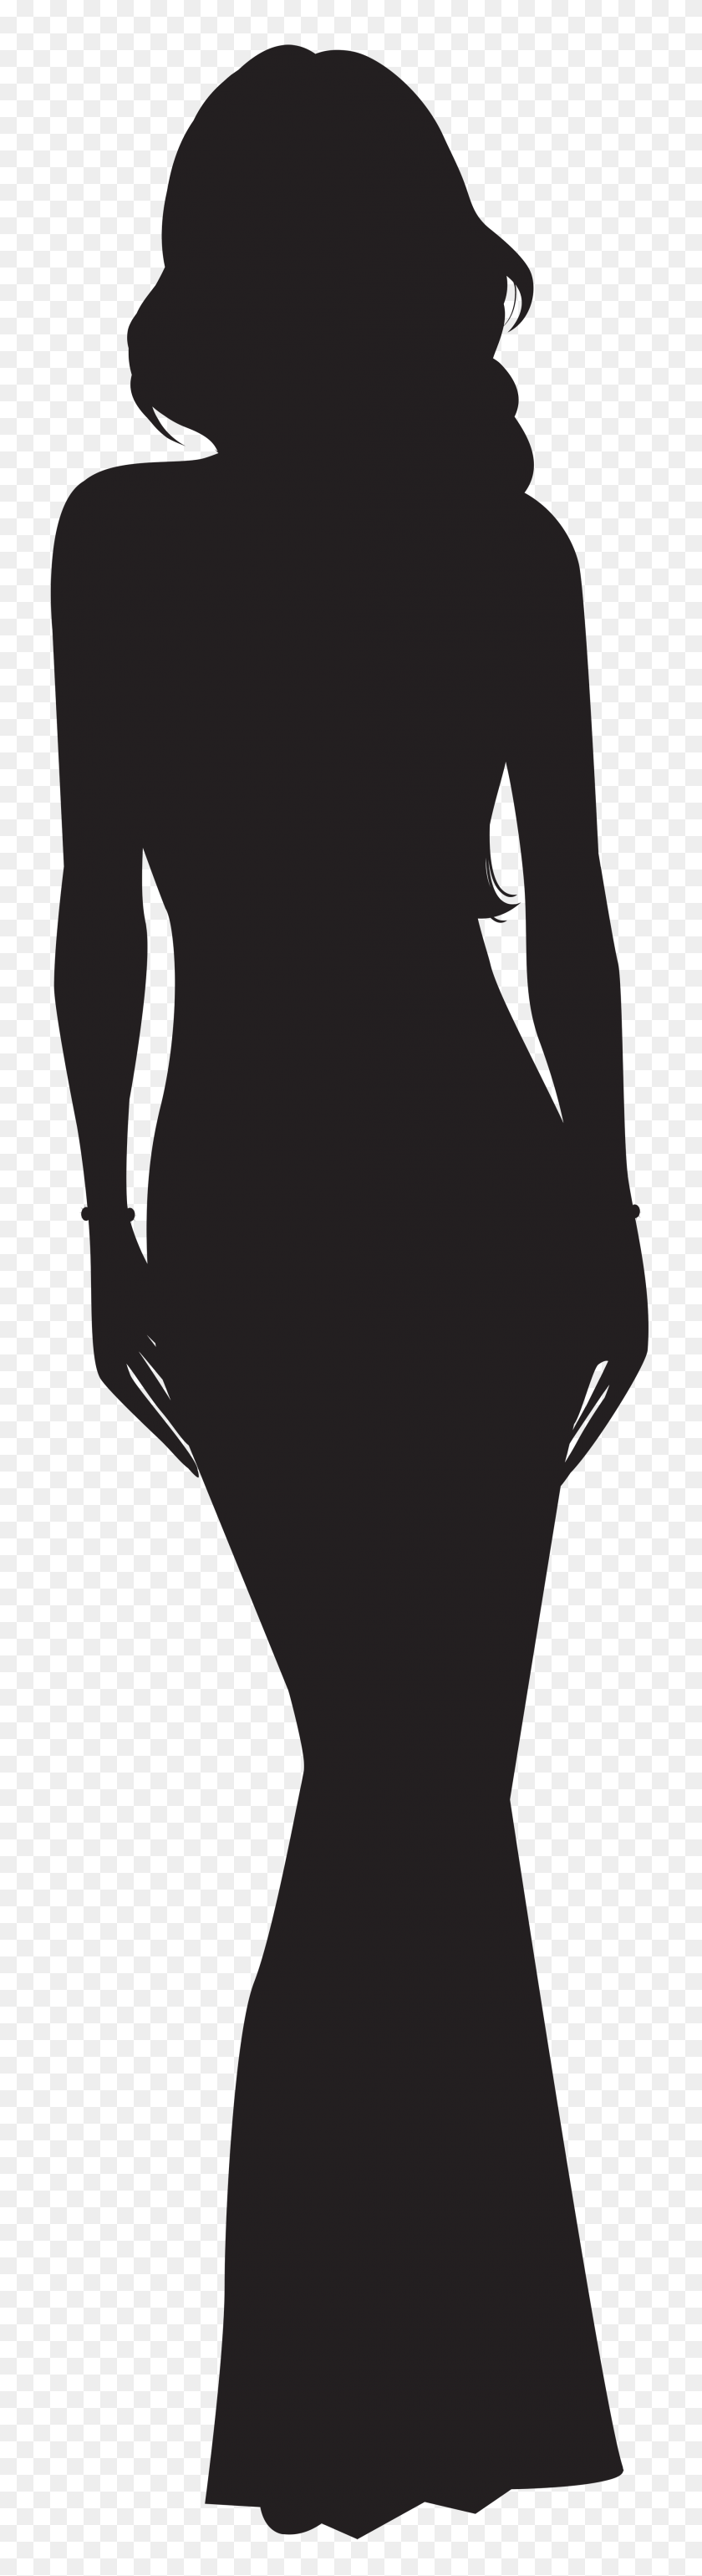 2065x8000 Woman Silhouette Png Clip Art - Woman Silhouette PNG